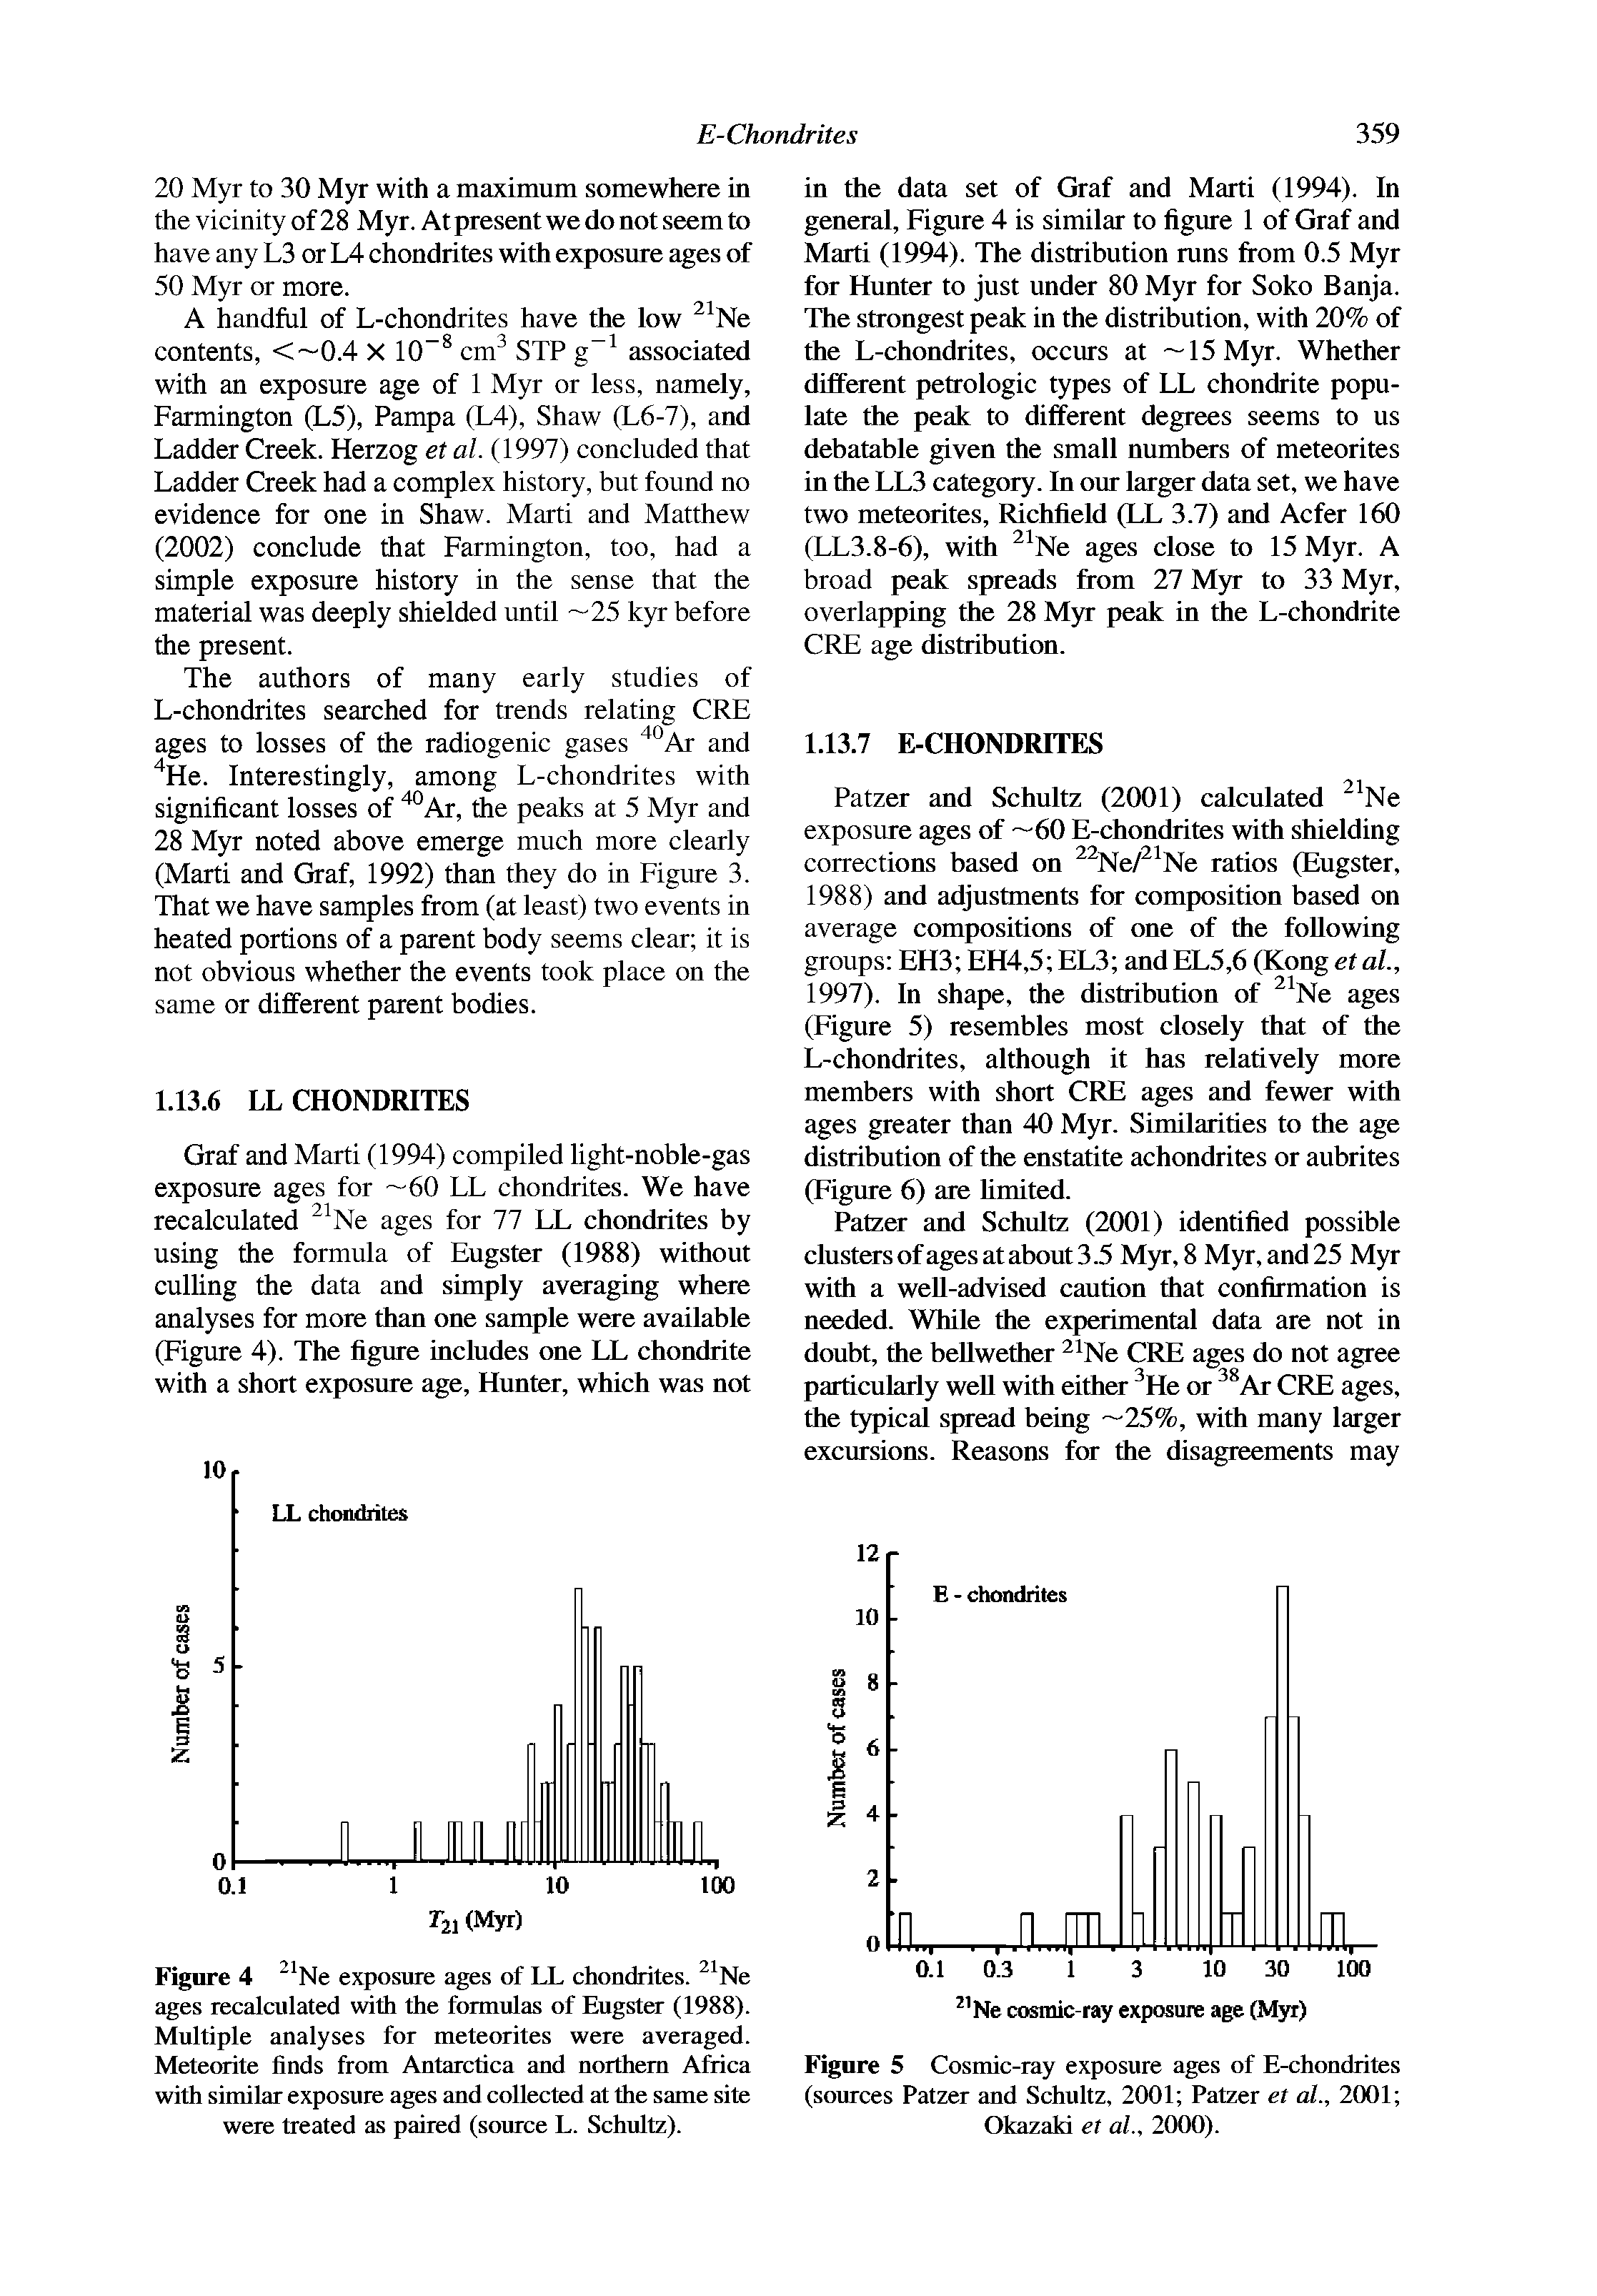 Figure 4 Ne exposure ages of LL chondrites. Ne ages recalculated with the formulas of Eugster (1988). Multiple analyses for meteorites were averaged. Meteorite finds from Antarctica and northern Africa with similar exposure ages and collected at the same site were treated as paired (source L. Schultz).